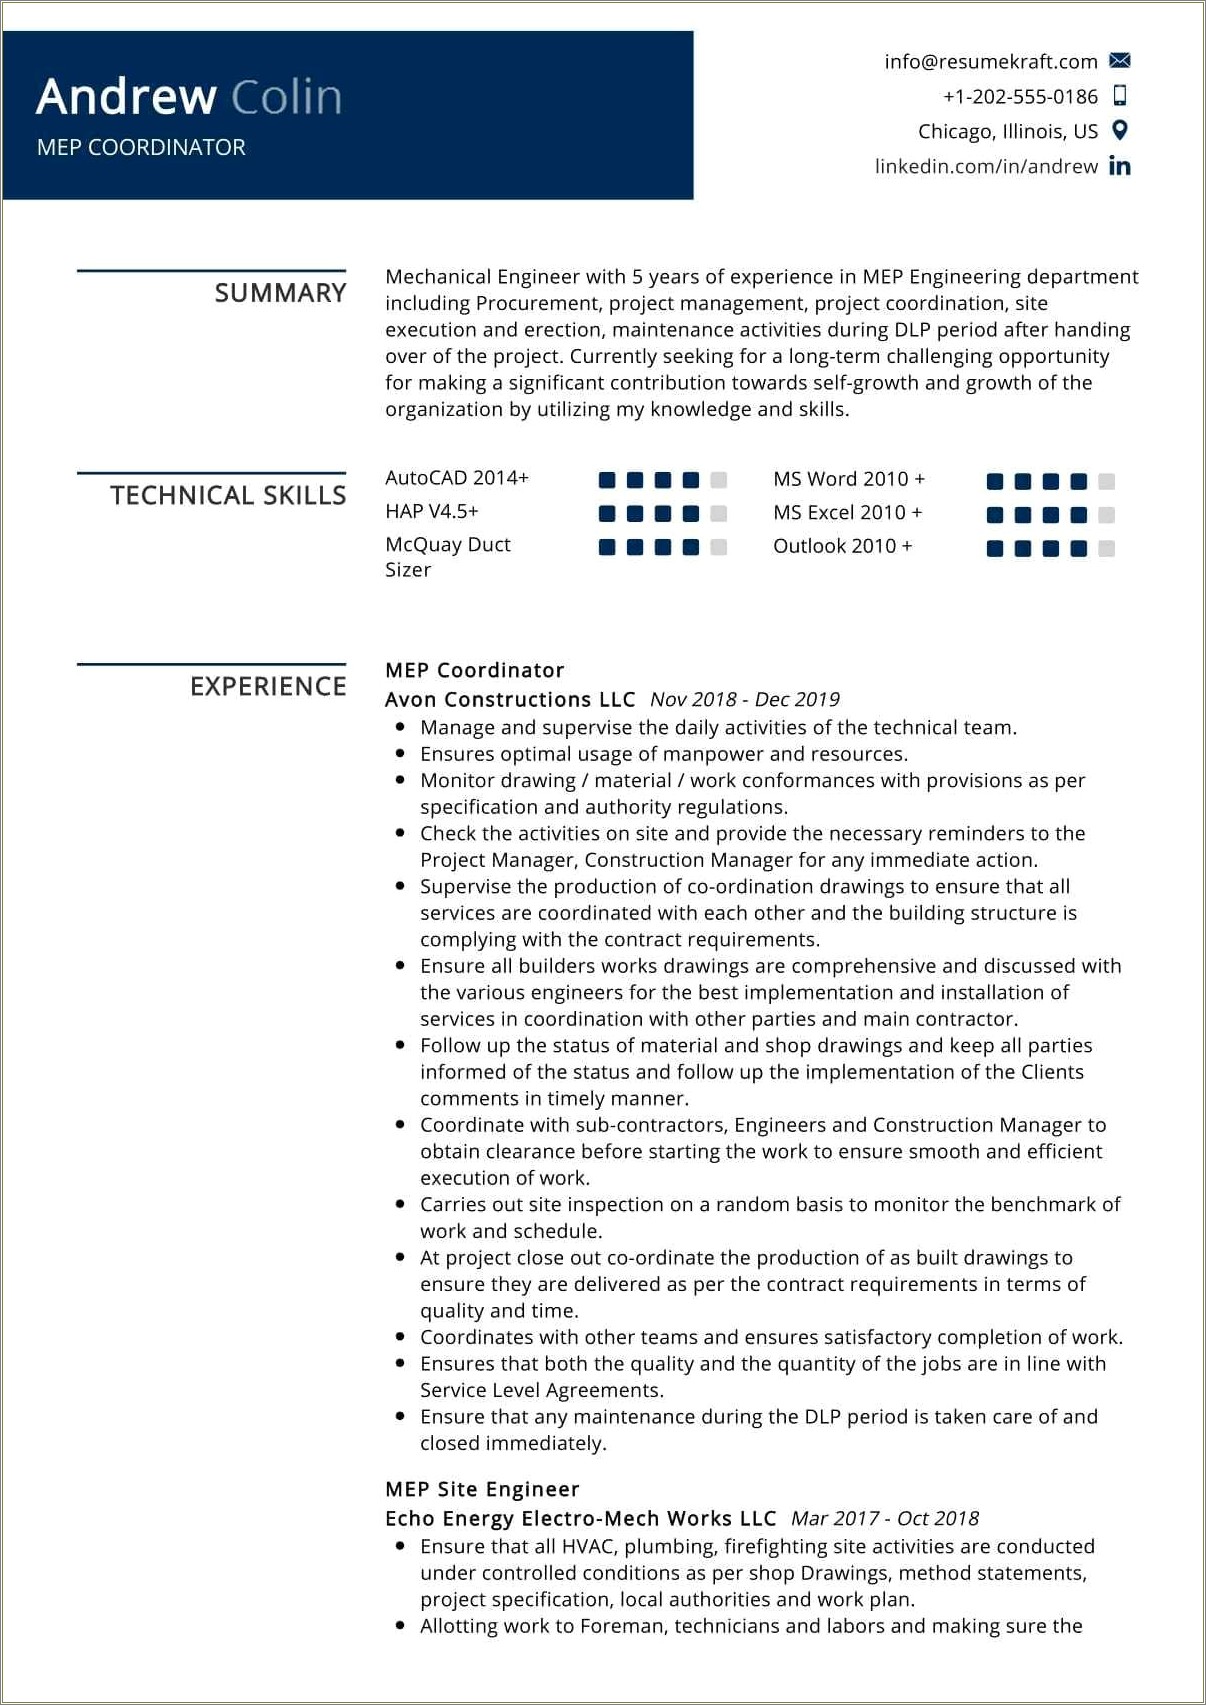 1 Year Experience Resume Sample For Mechanical Engineer